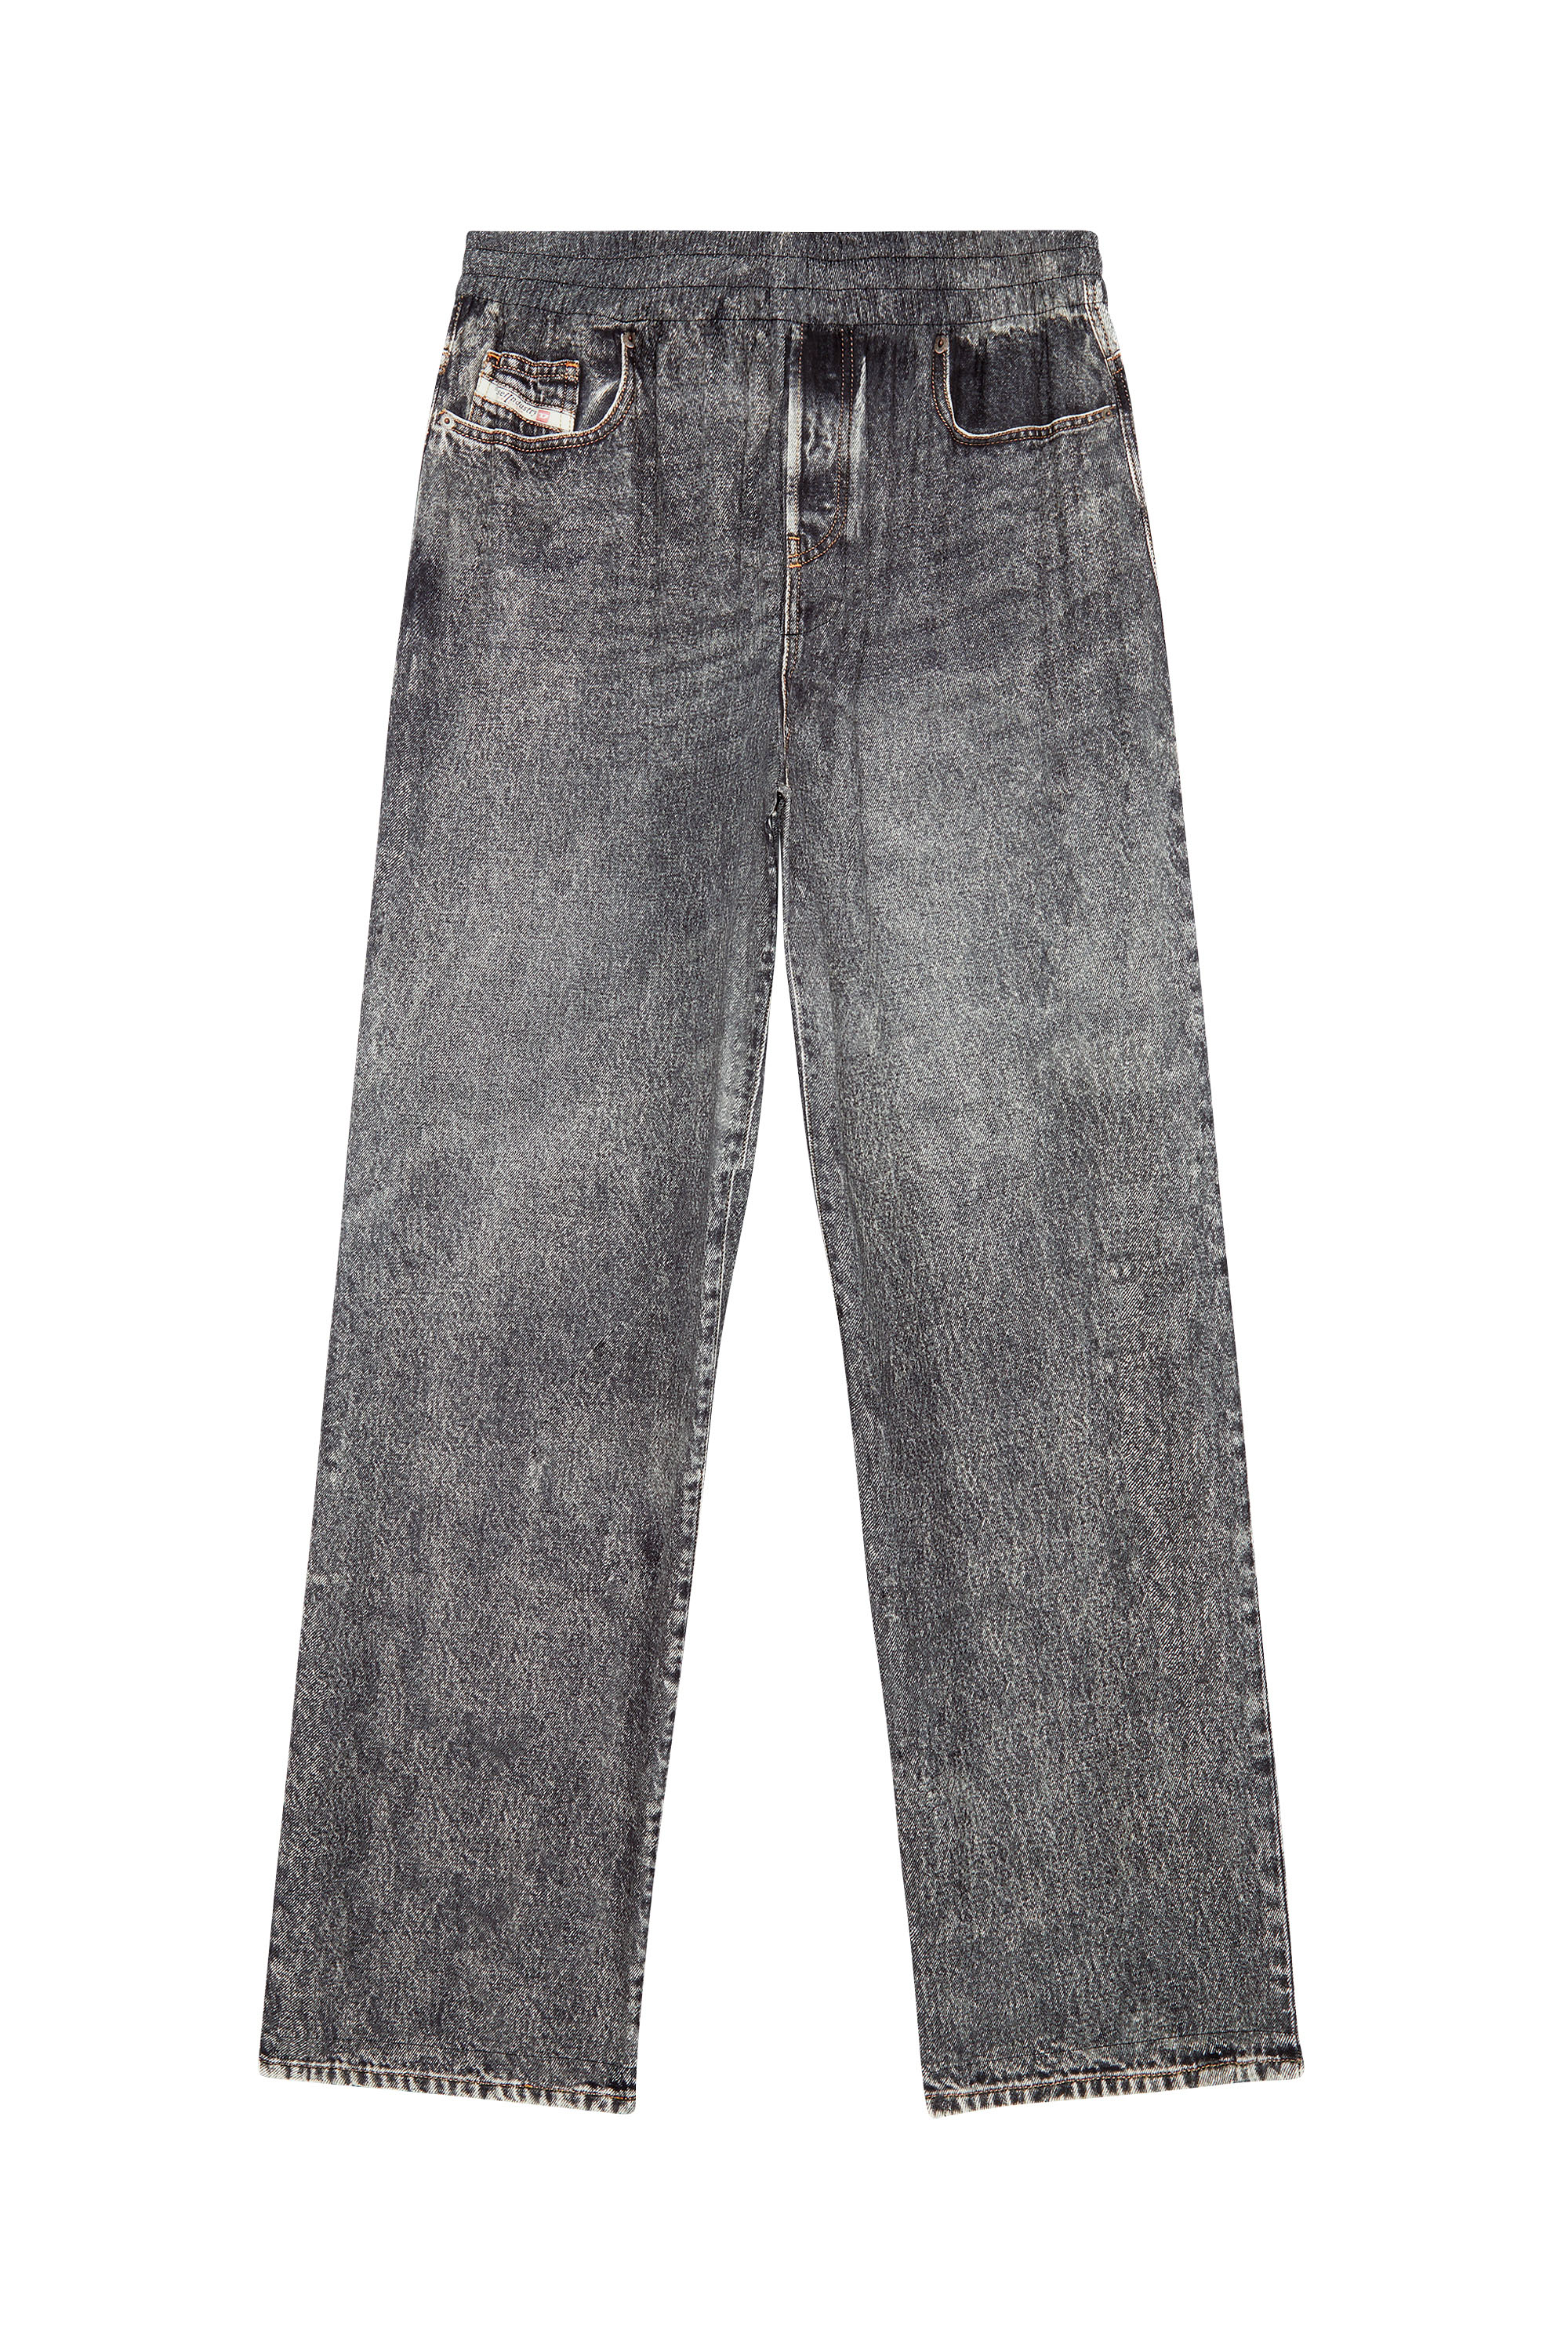 Diesel - P-FERGY-A, Gris oscuro - Image 6